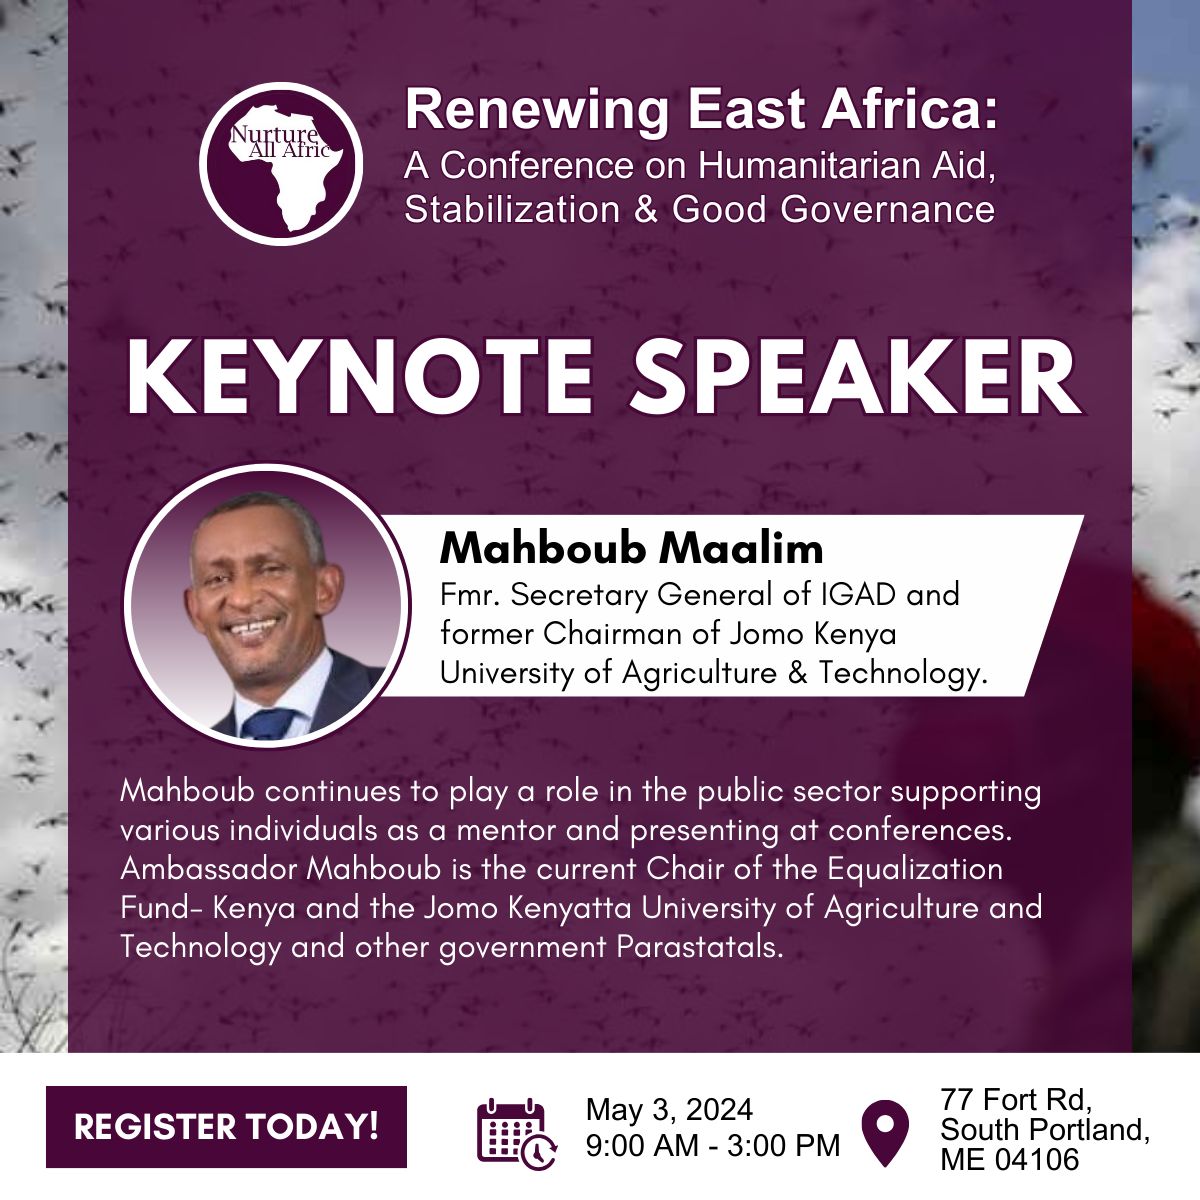 Join us at the Renewing East Africa Conference on May 3rd! Hear firsthand insights from keynote speaker Mahboub Maalim, Former Secretary General of IGAD. 

Register for the event today at: lnkd.in/gFbX3Mt9

#RenewingEastAfrica #SocialImpact